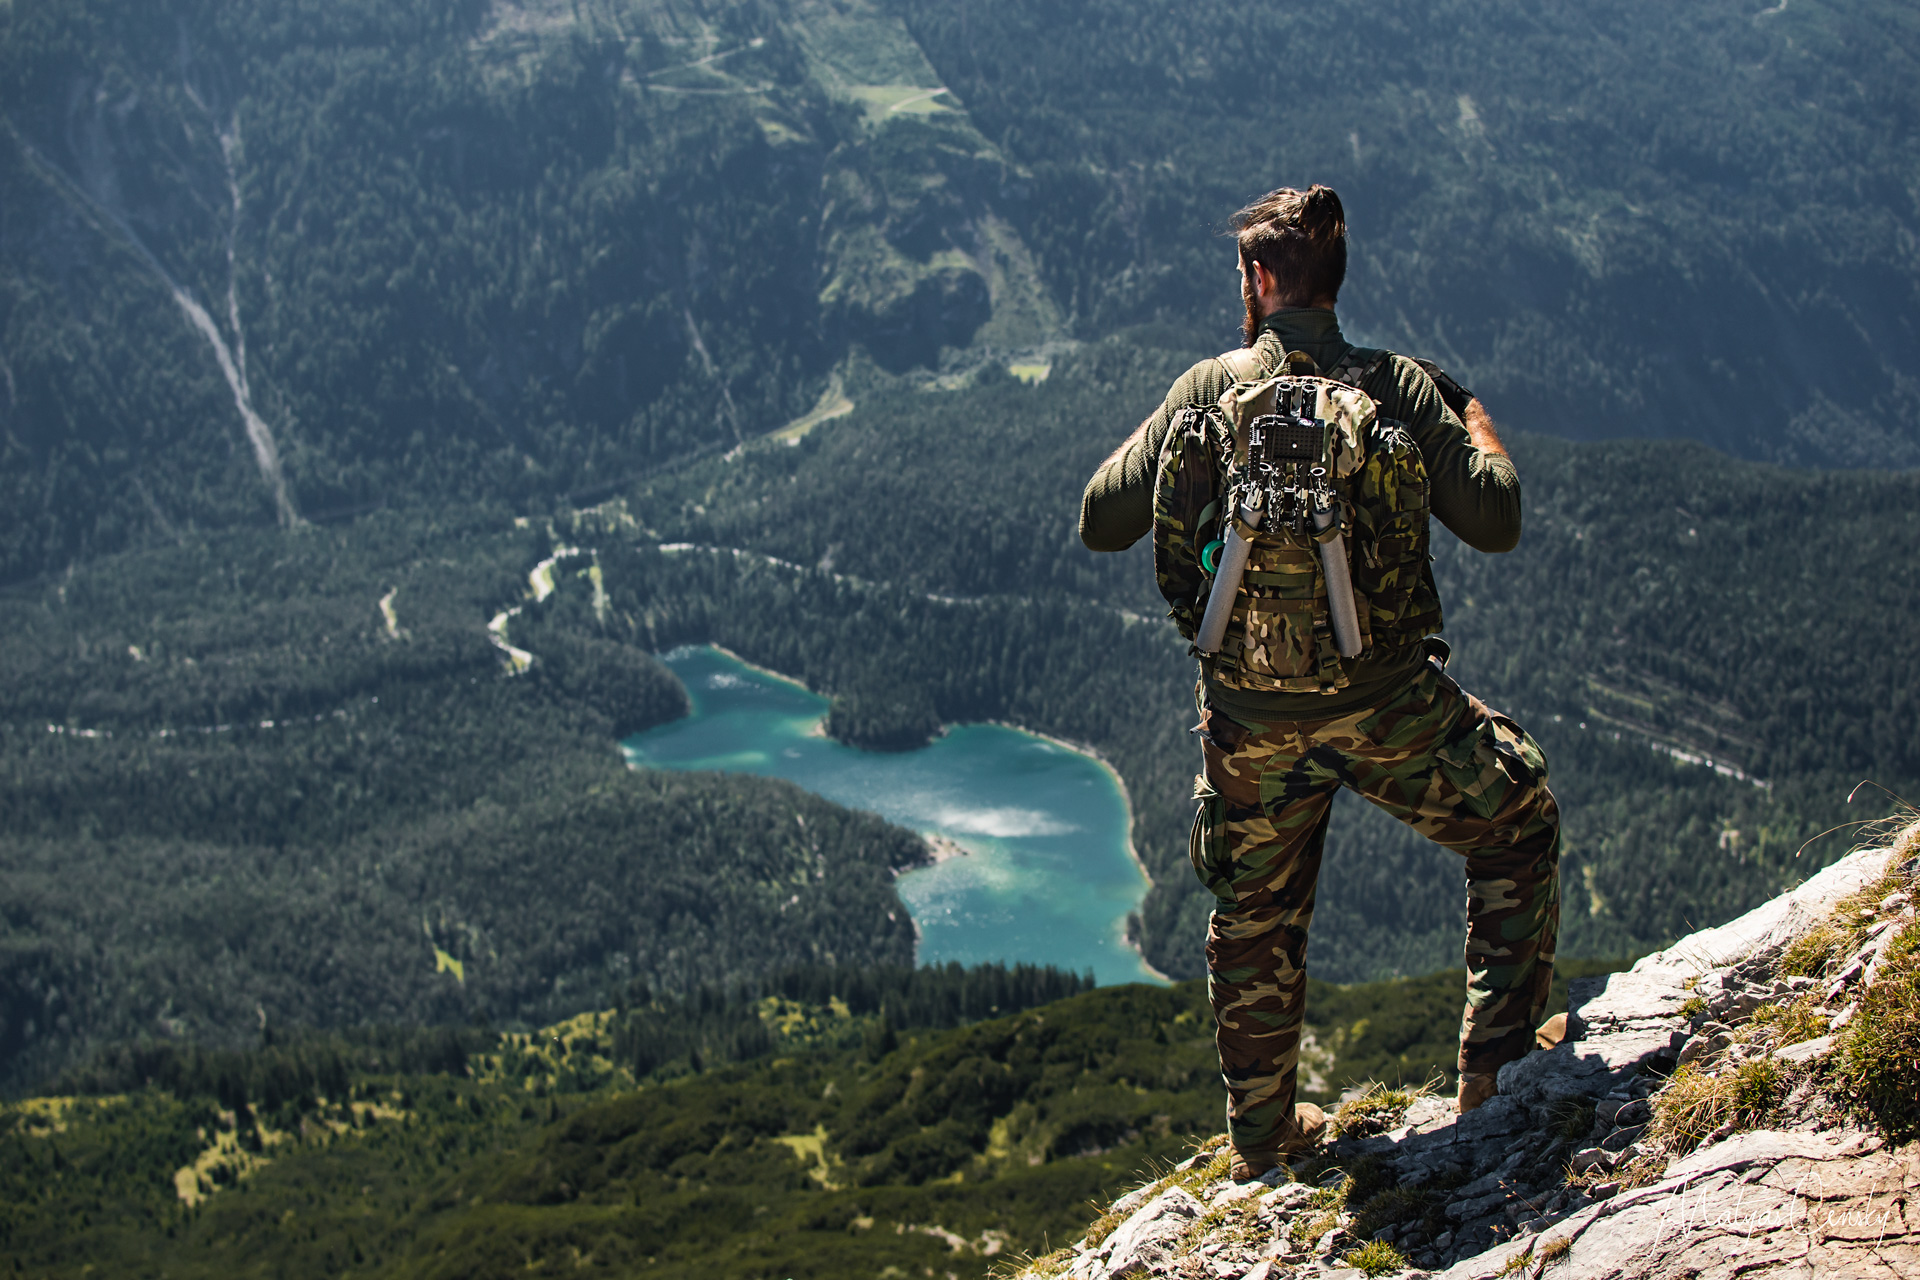 Photo of a men in camouflage outfit standing up in the mountains looking down on a blue lake.